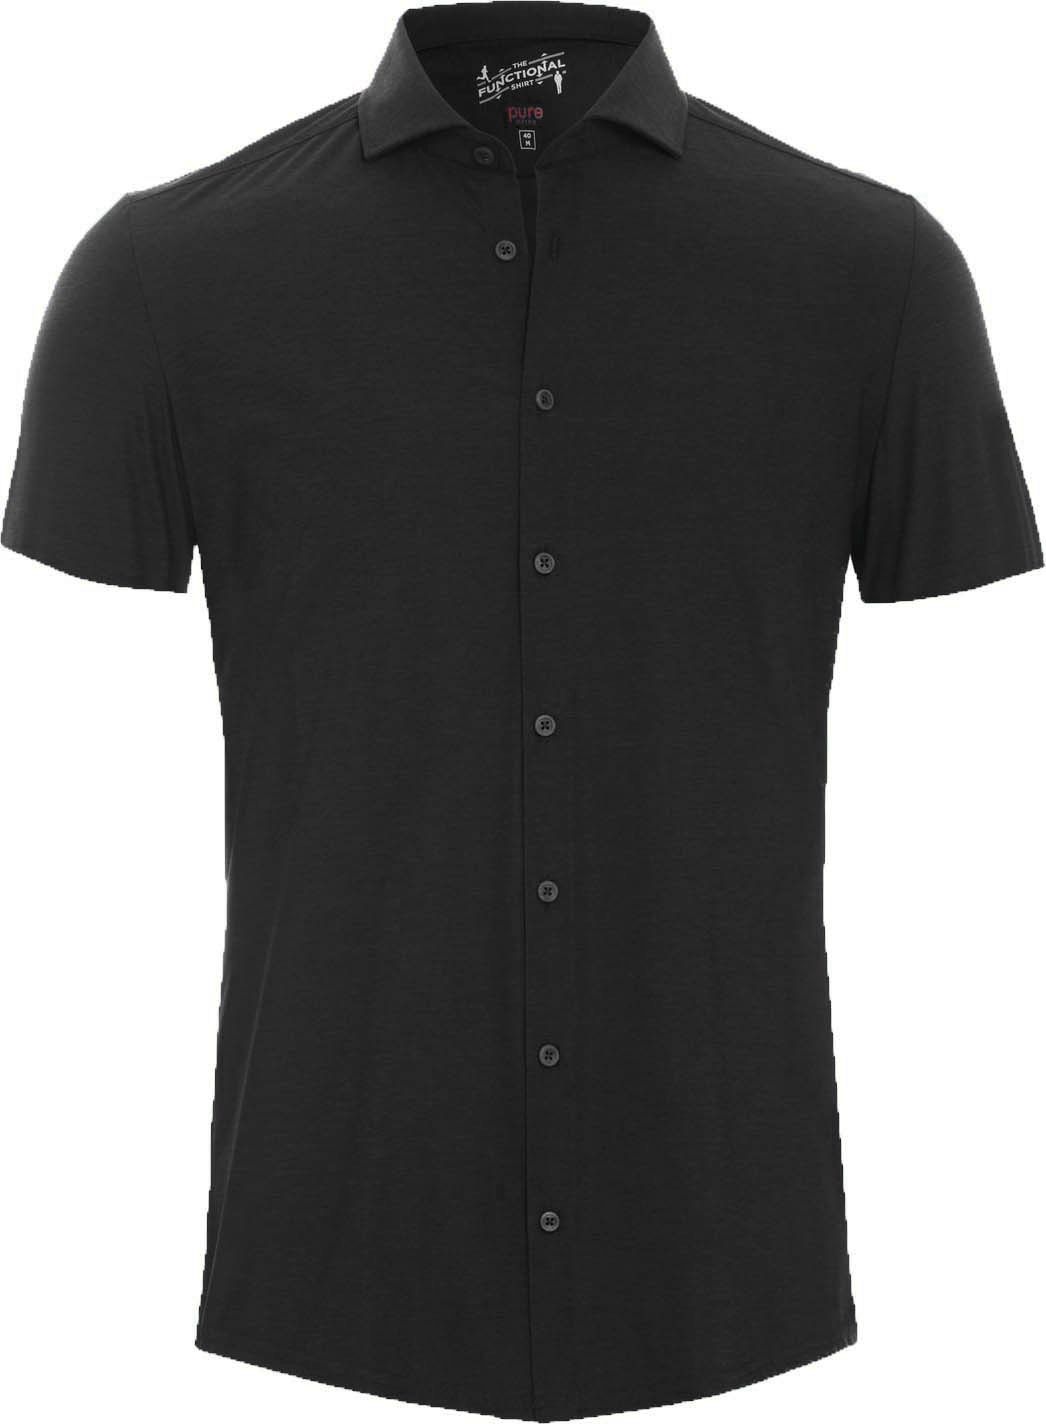 Pure Functional Shirt Short Sleeves Black size 15